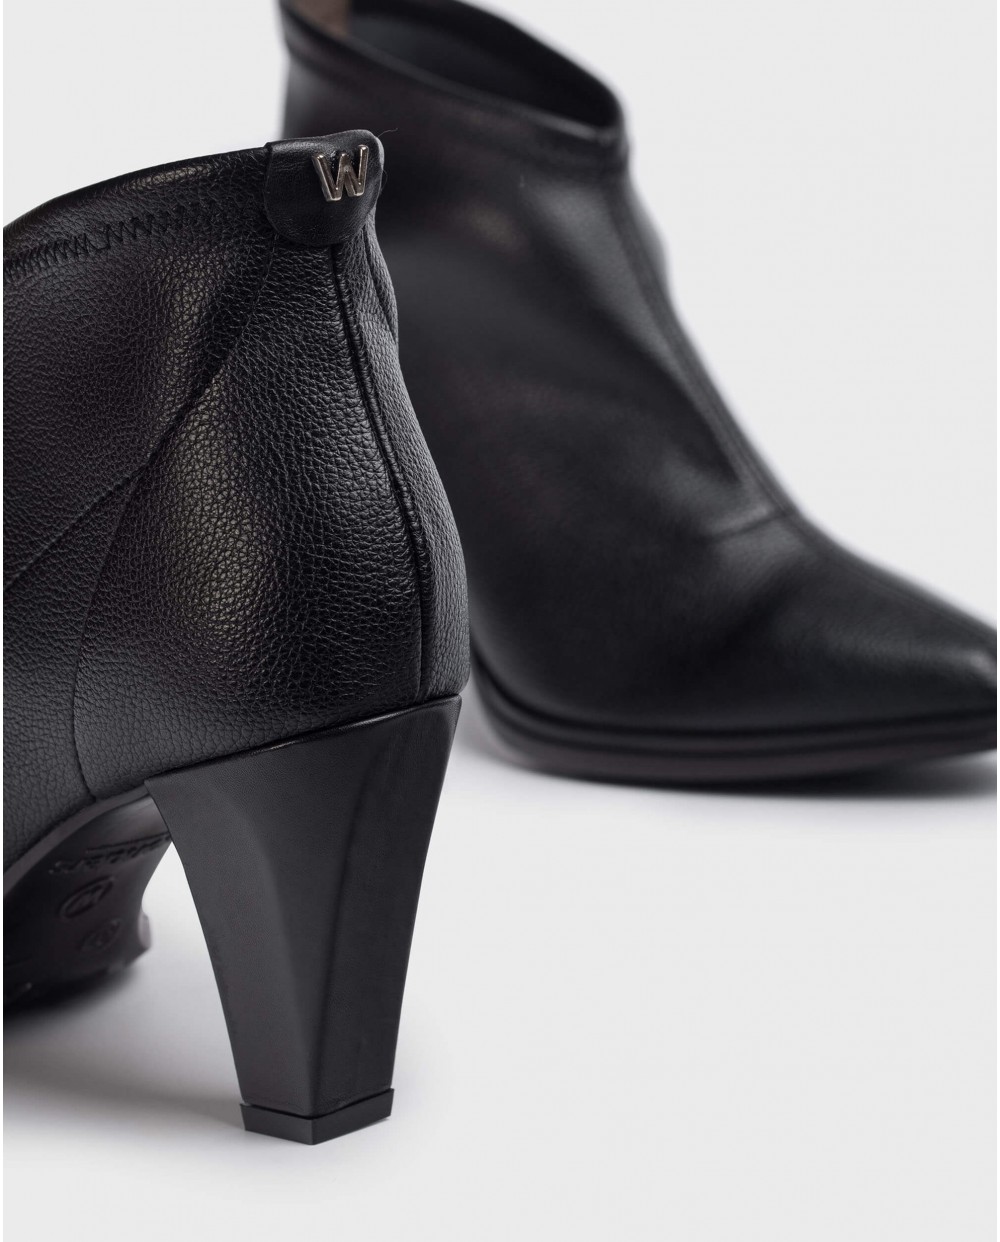 Wonders-Ankle Boots-Black Elastic Ankle Boot